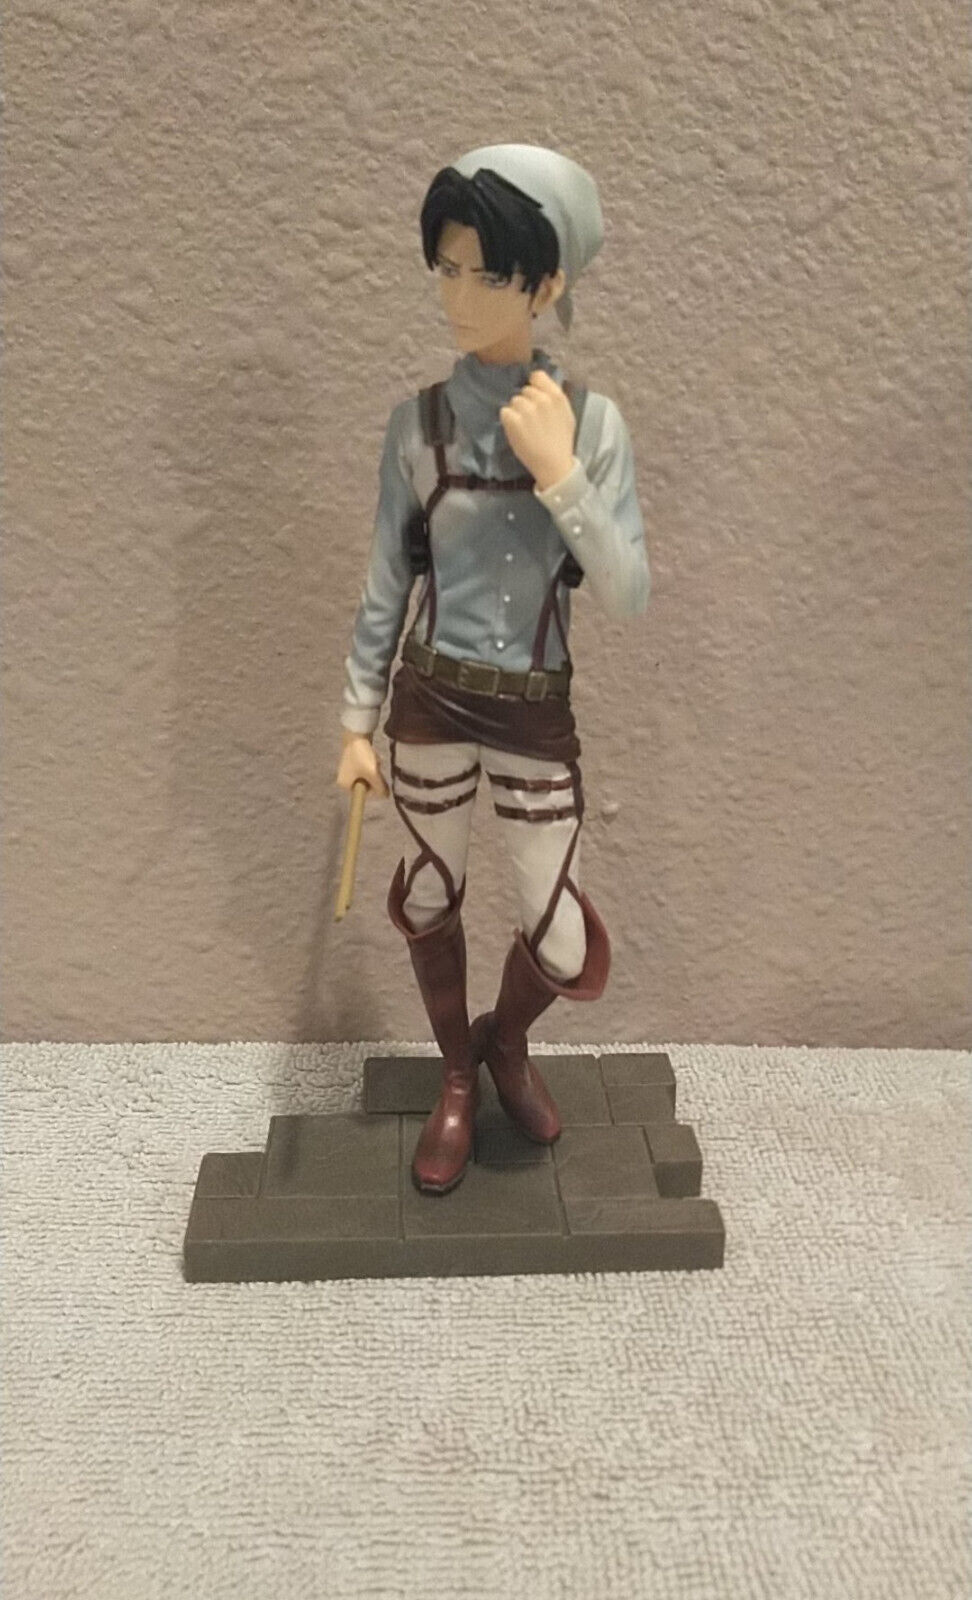 Banpresto Attack on Titan Levi DXF Figure (Loose and missing the mop head)